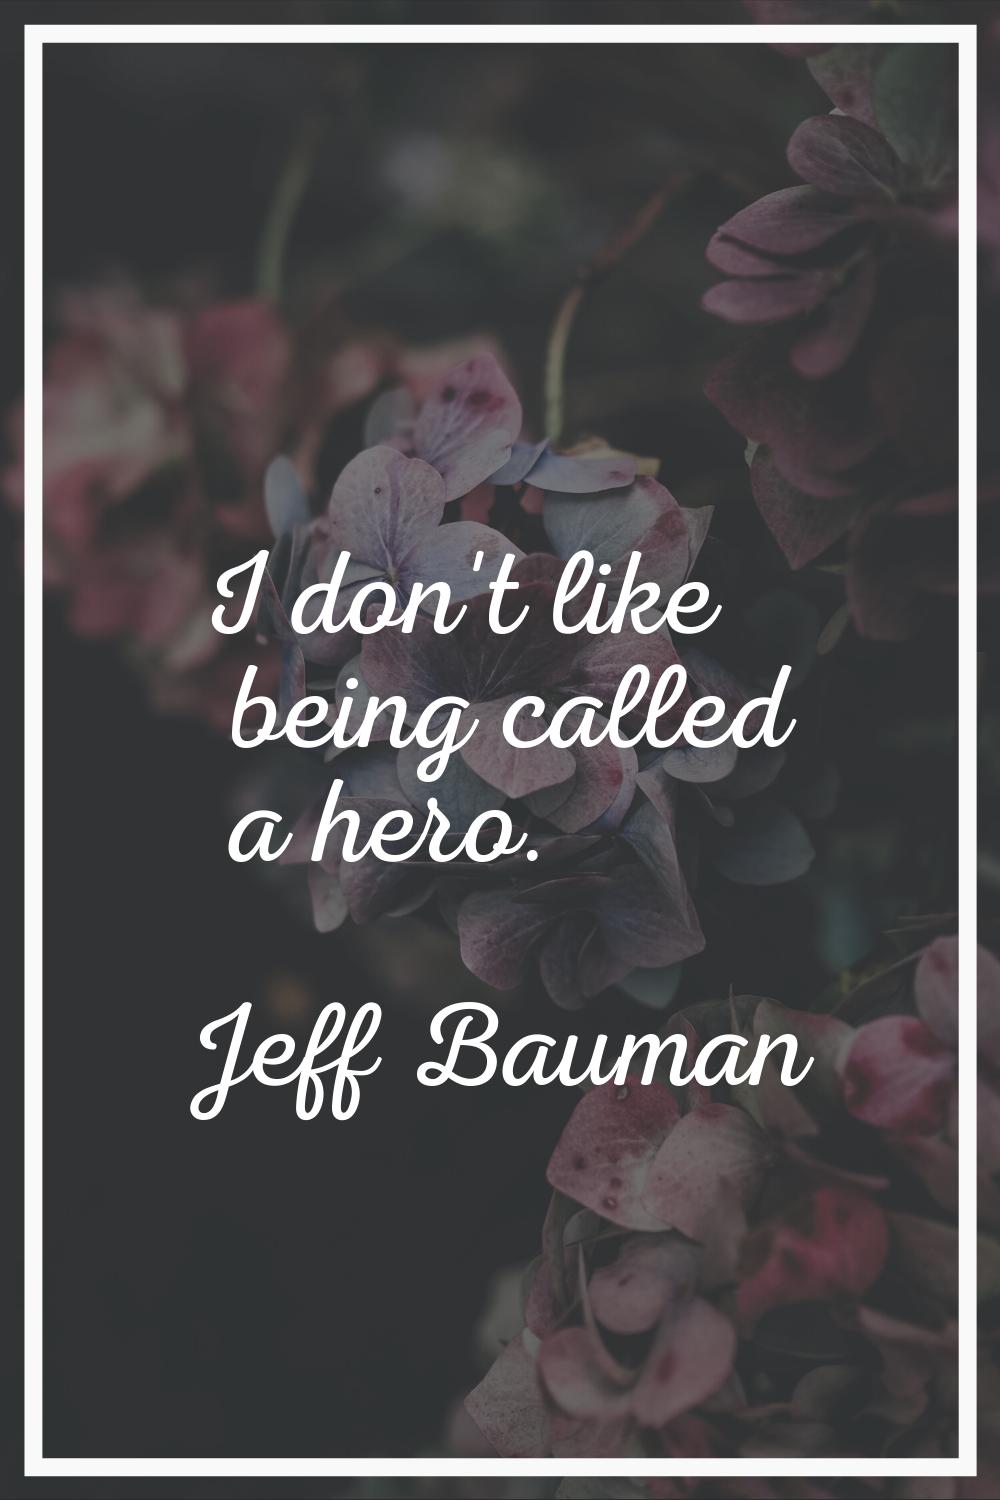 I don't like being called a hero.